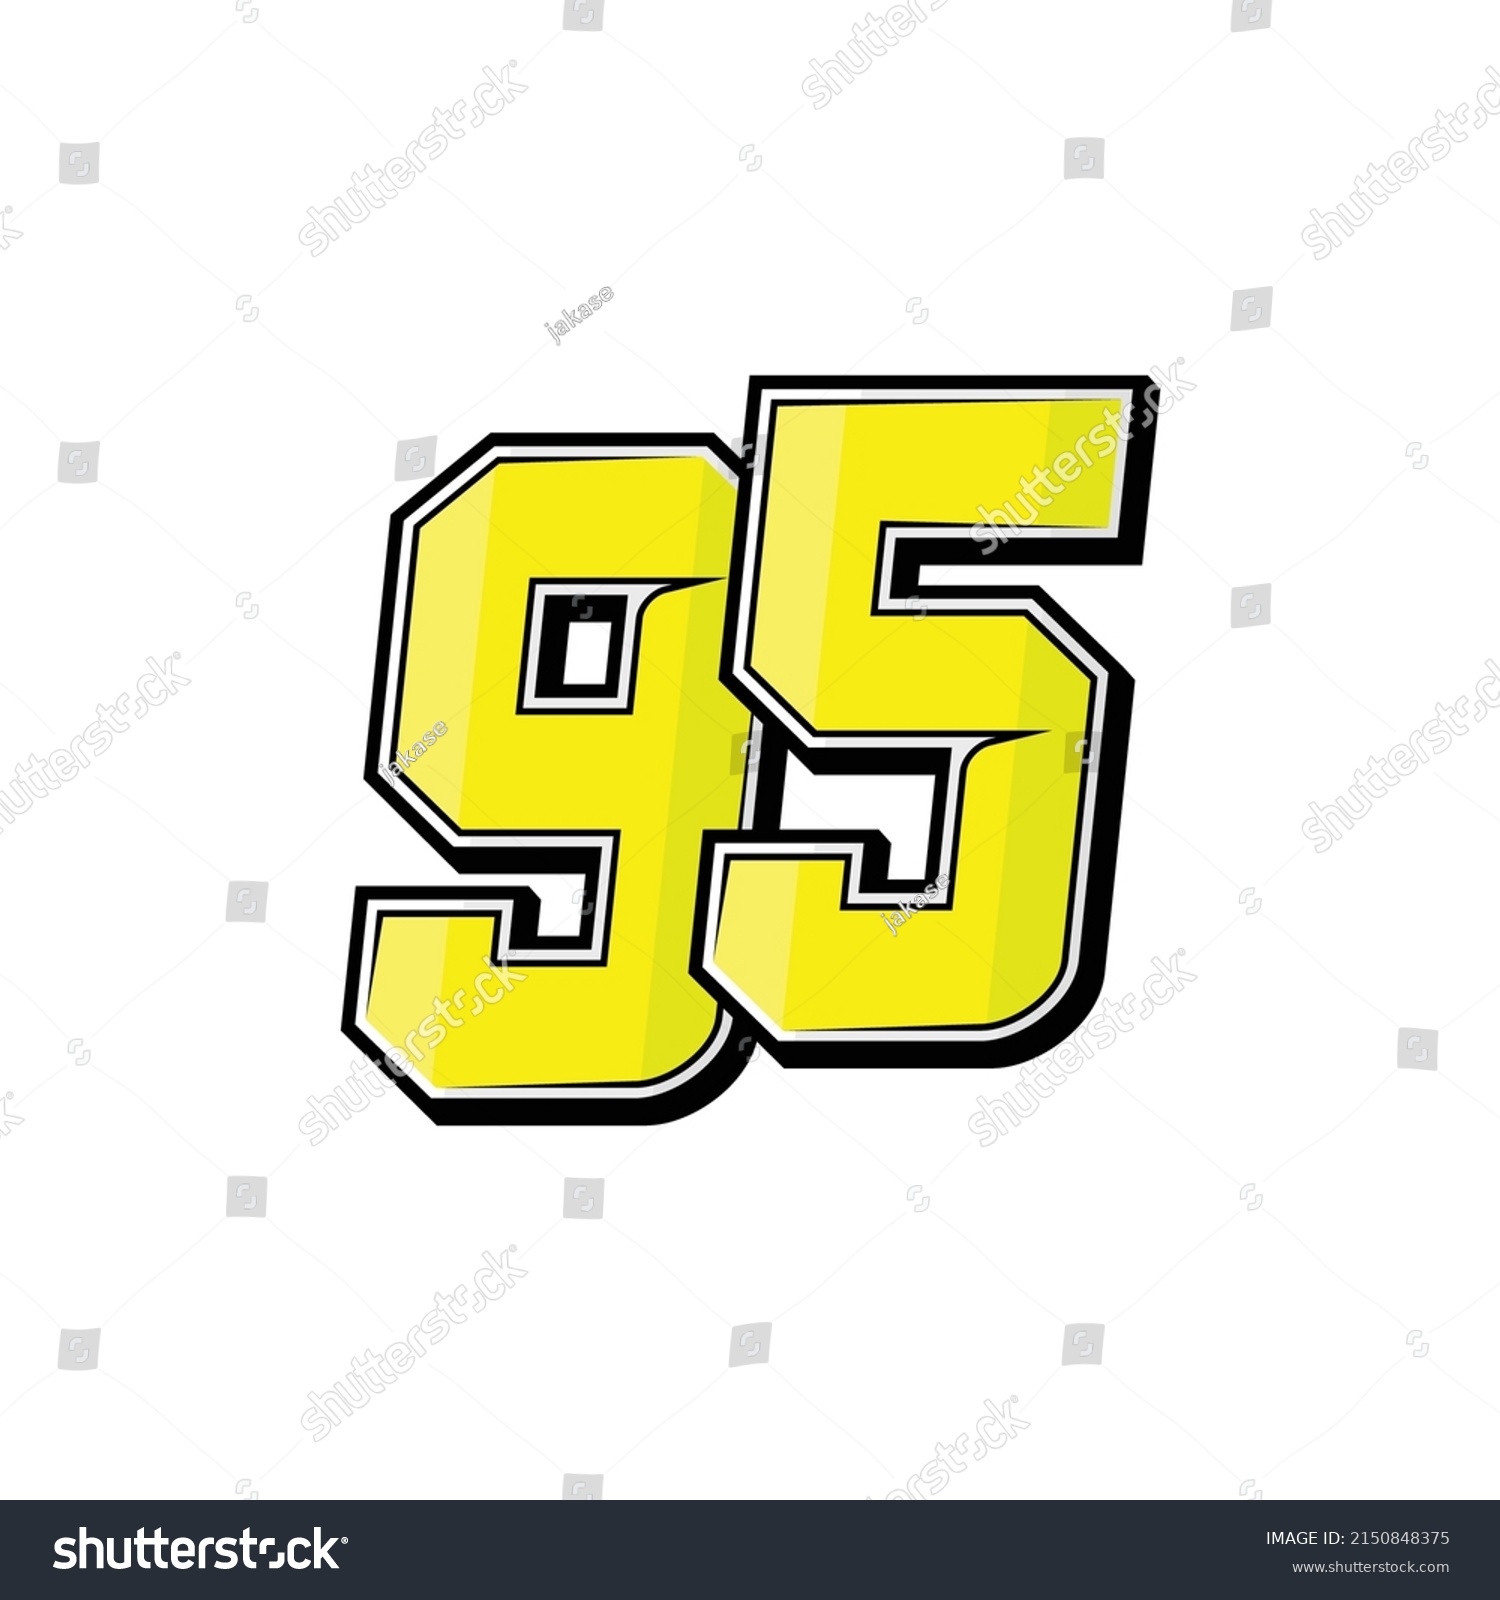 SVG of Vector sports numbers 95. Simple design svg